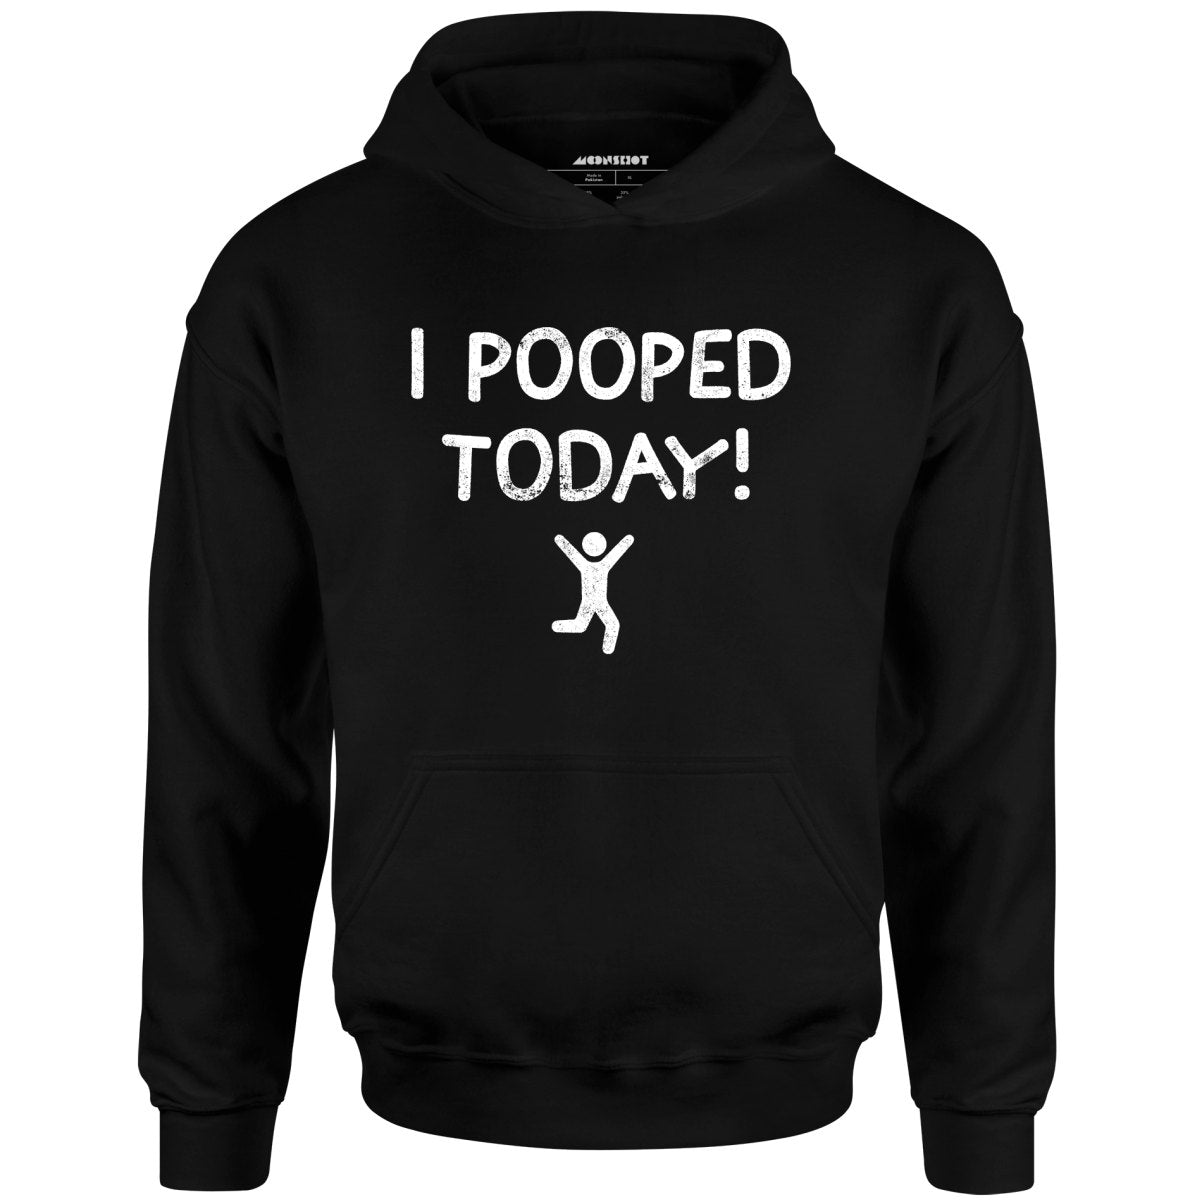 I Pooped Today! - Unisex Hoodie